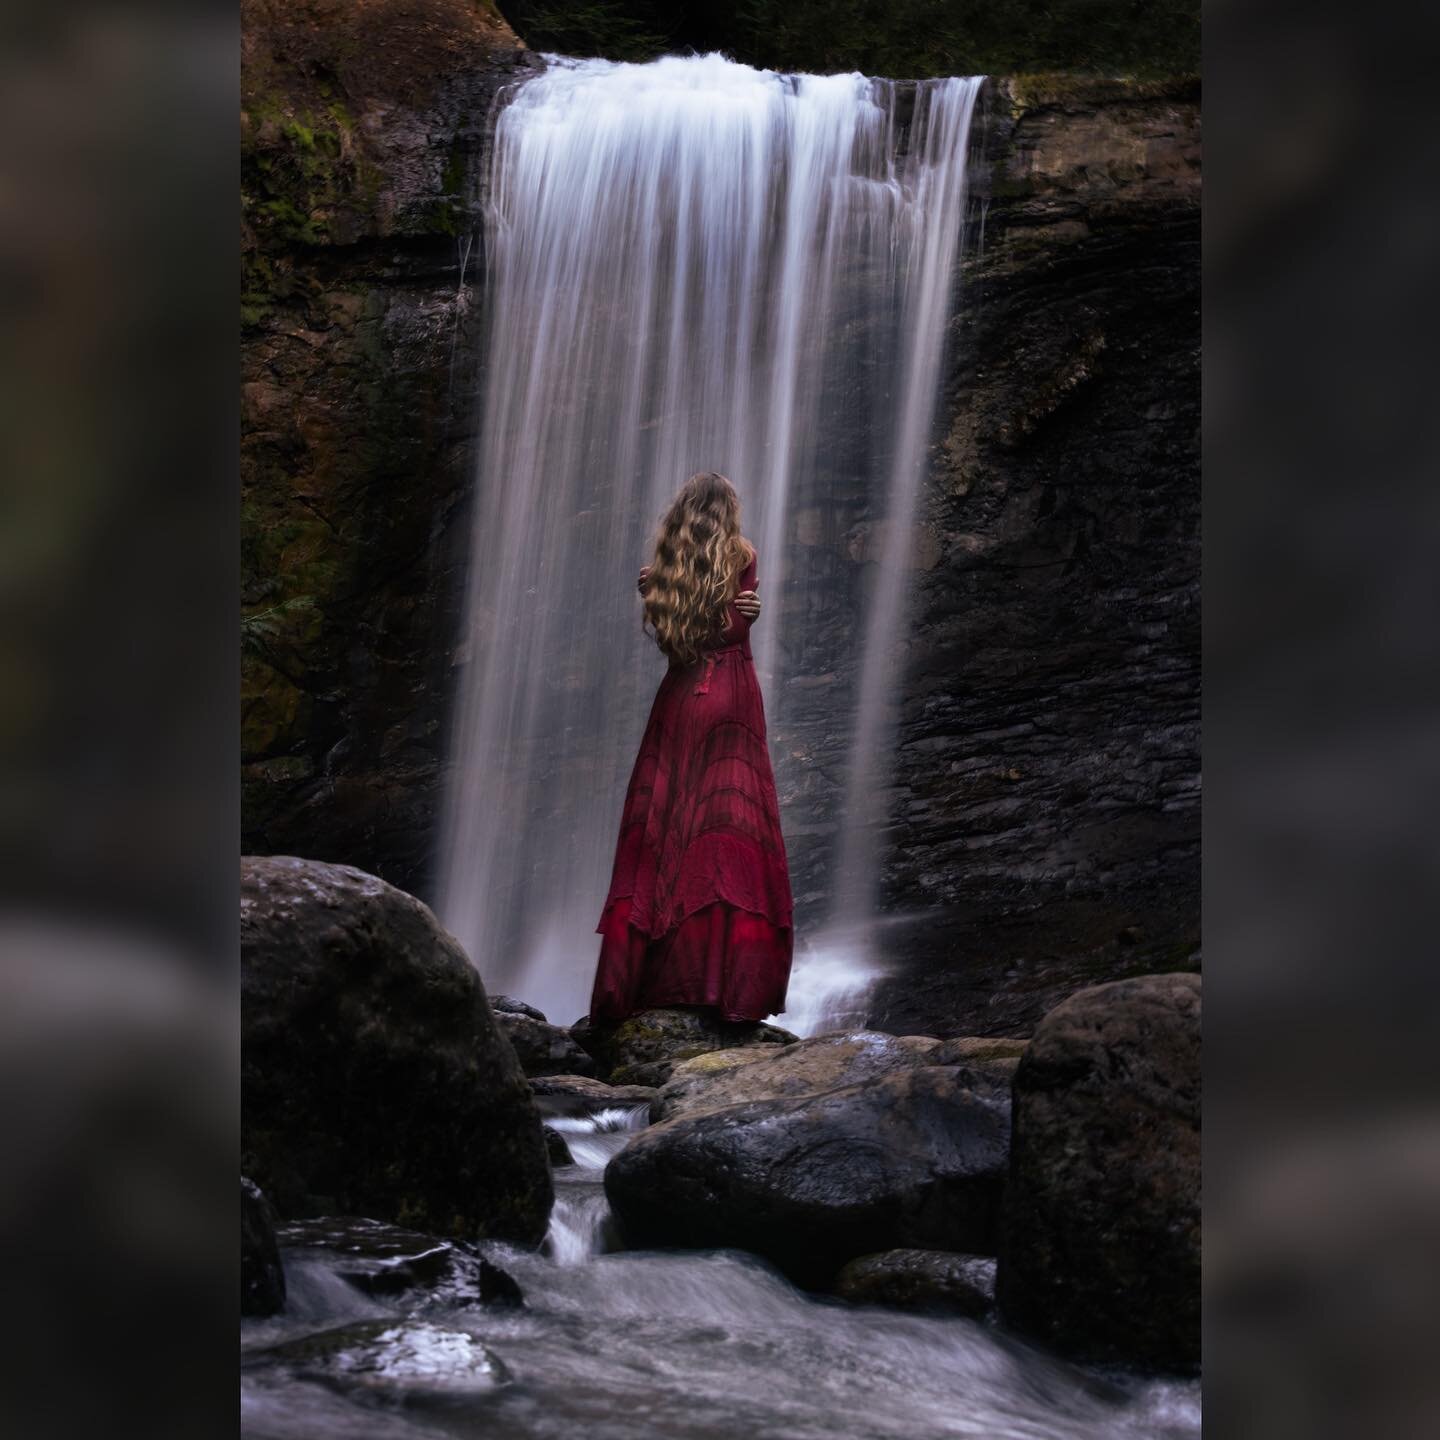 &ldquo;I would love to live like a river flows, carried by the surprise of its own unfolding.&rdquo; 
&ndash; John O&rsquo;Donohue

#weadventuresoon 

Camera ~ r5 @canoncanada @canonusa  70 -200 rf lens 
Model ~ @elizabethgadd 

#wildycreative #Canon